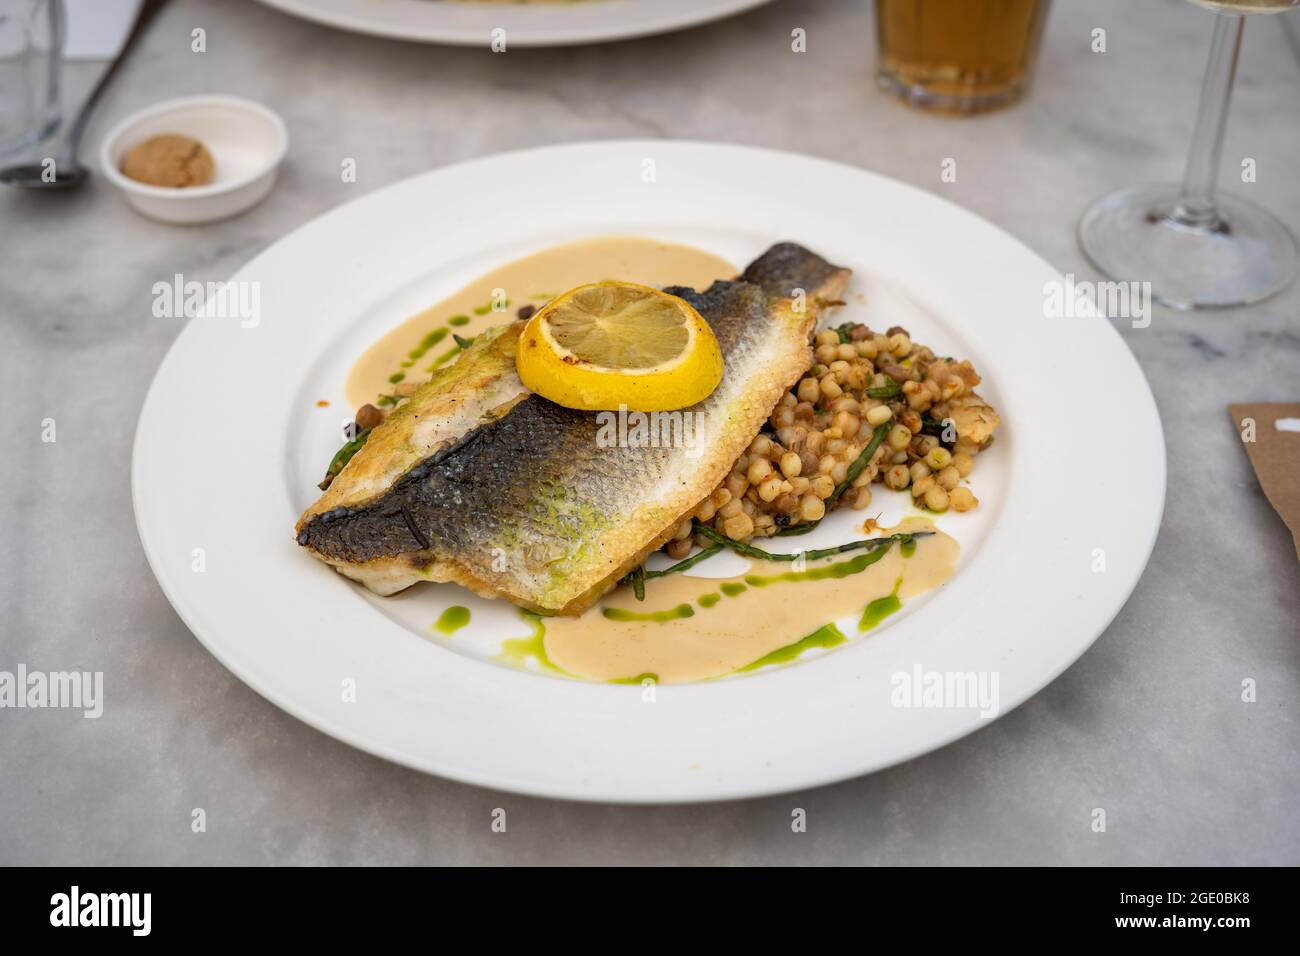 A plate with a piece of fish with lemon and pearl couscous, eating out at a restaurant Stock Photo